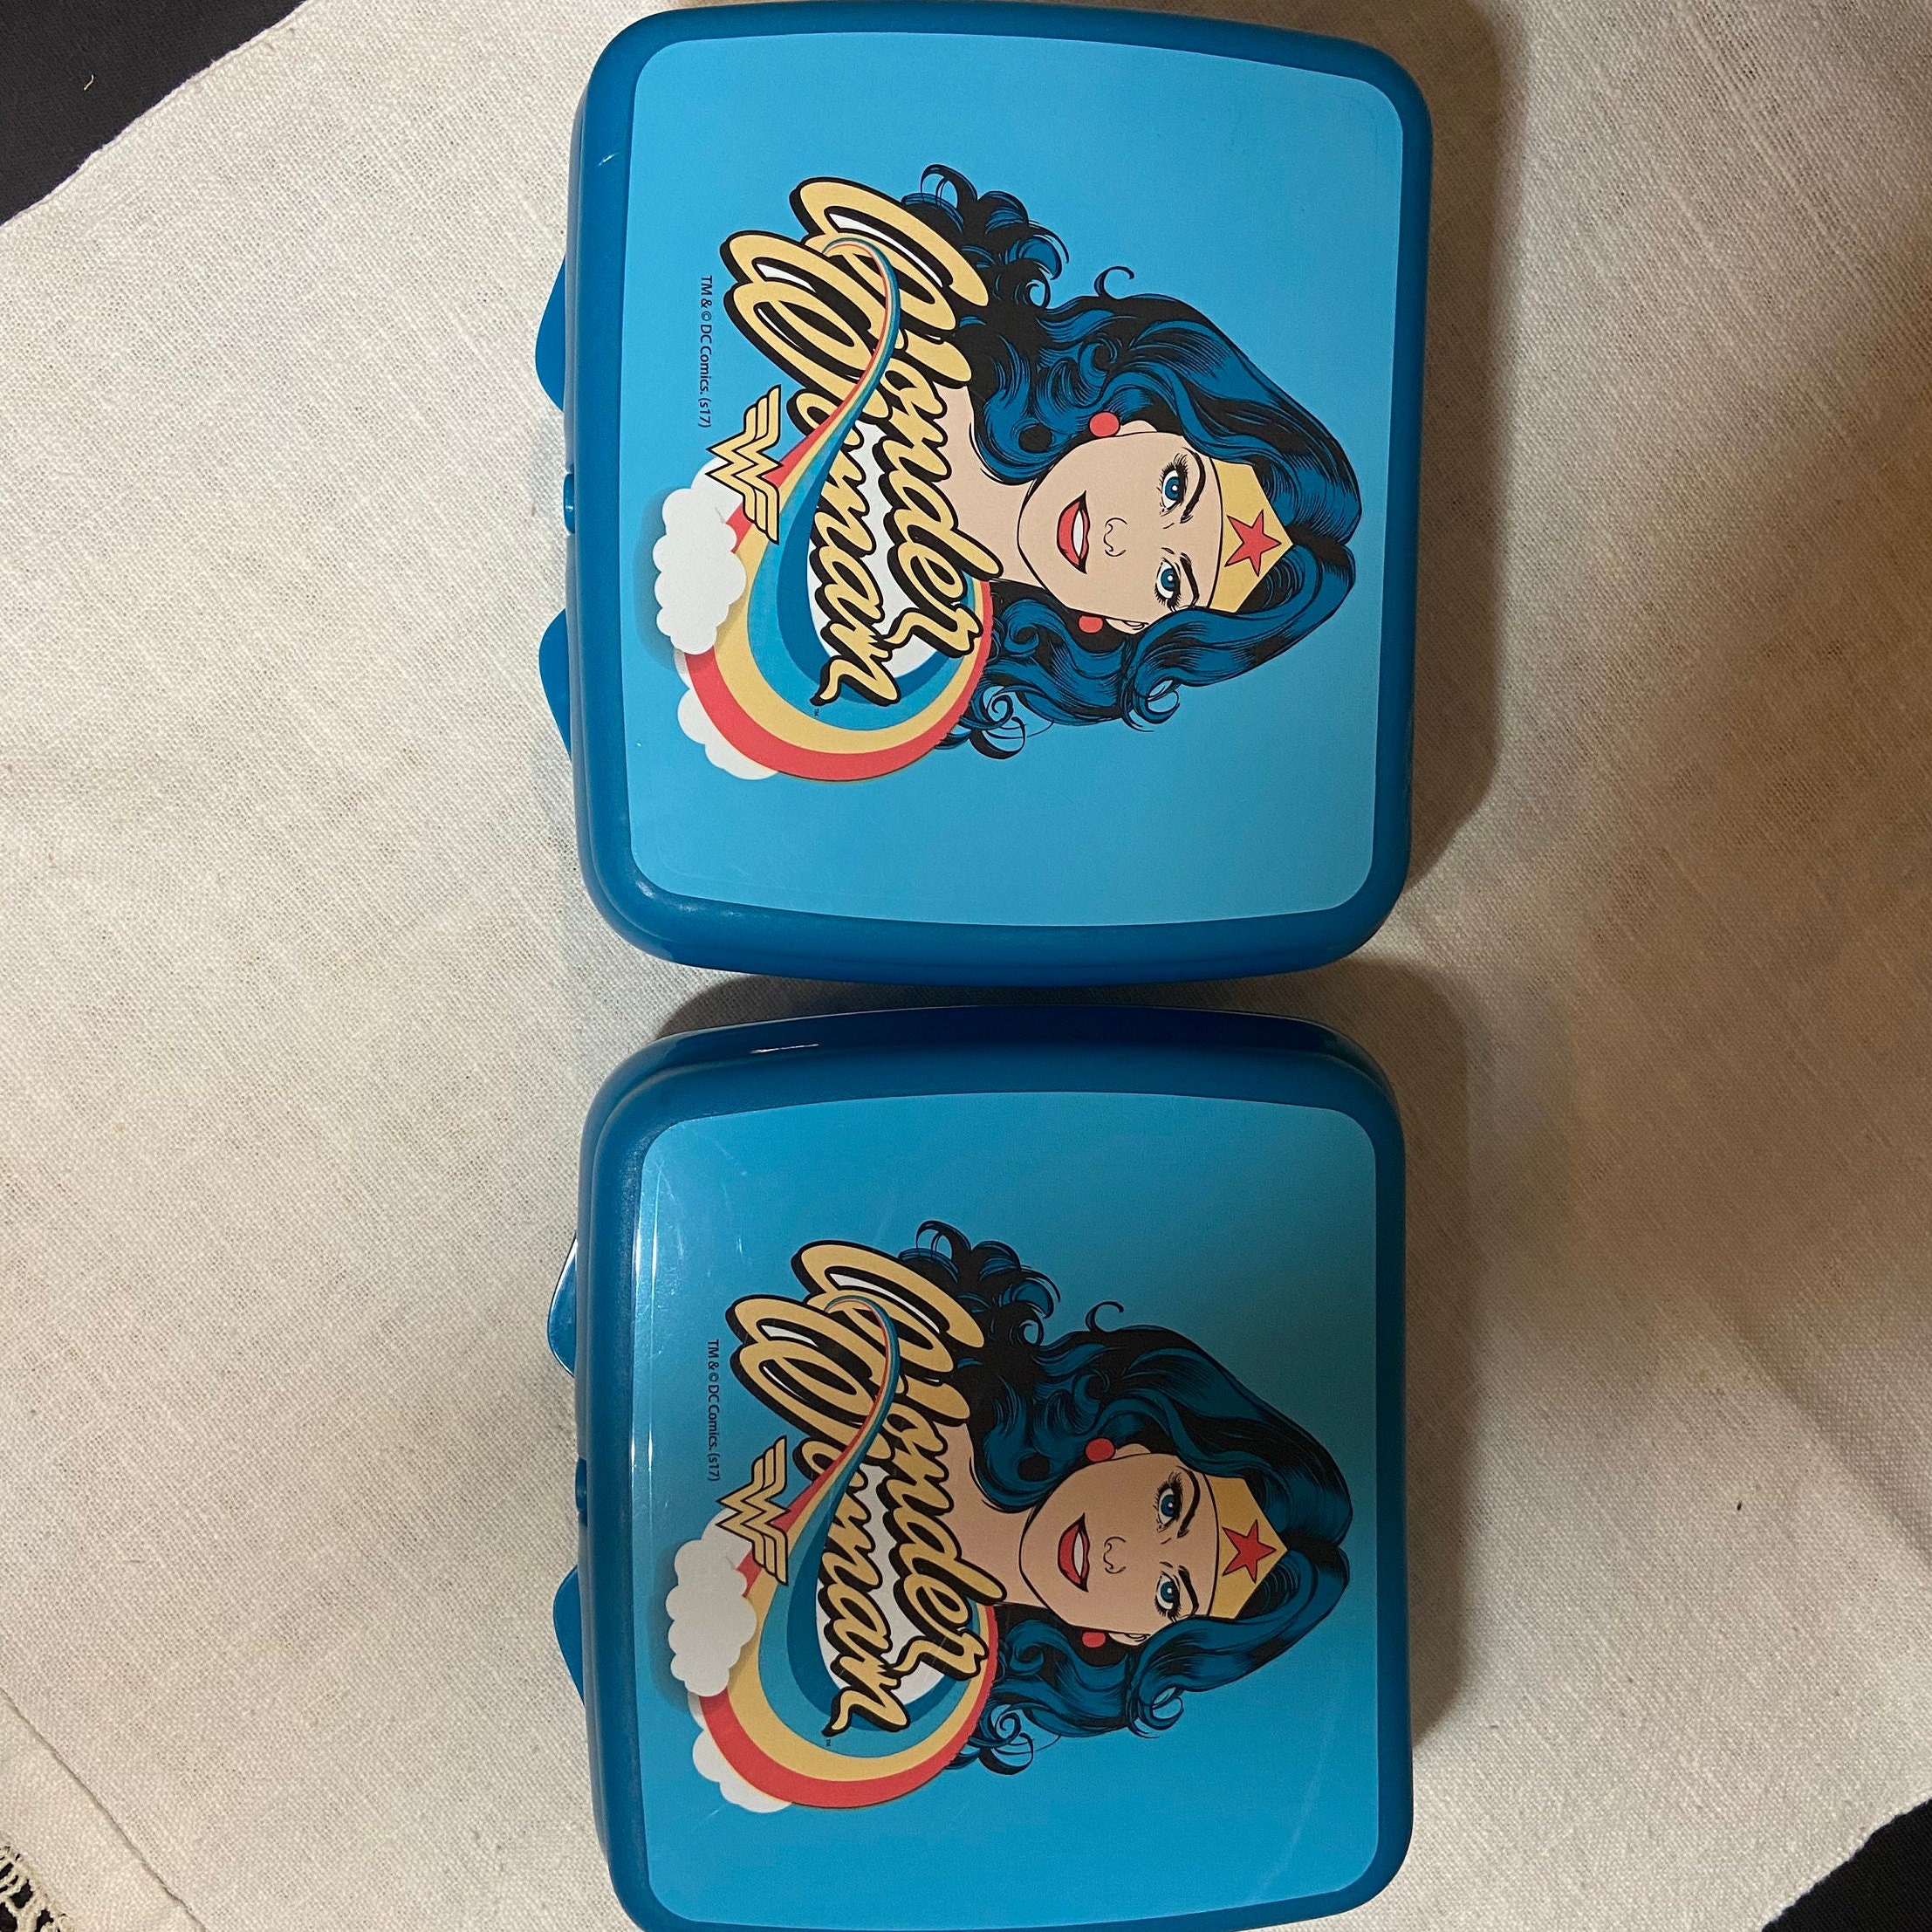 Thermos Dual Compartment Lunch Kit Wonder Woman with Cape